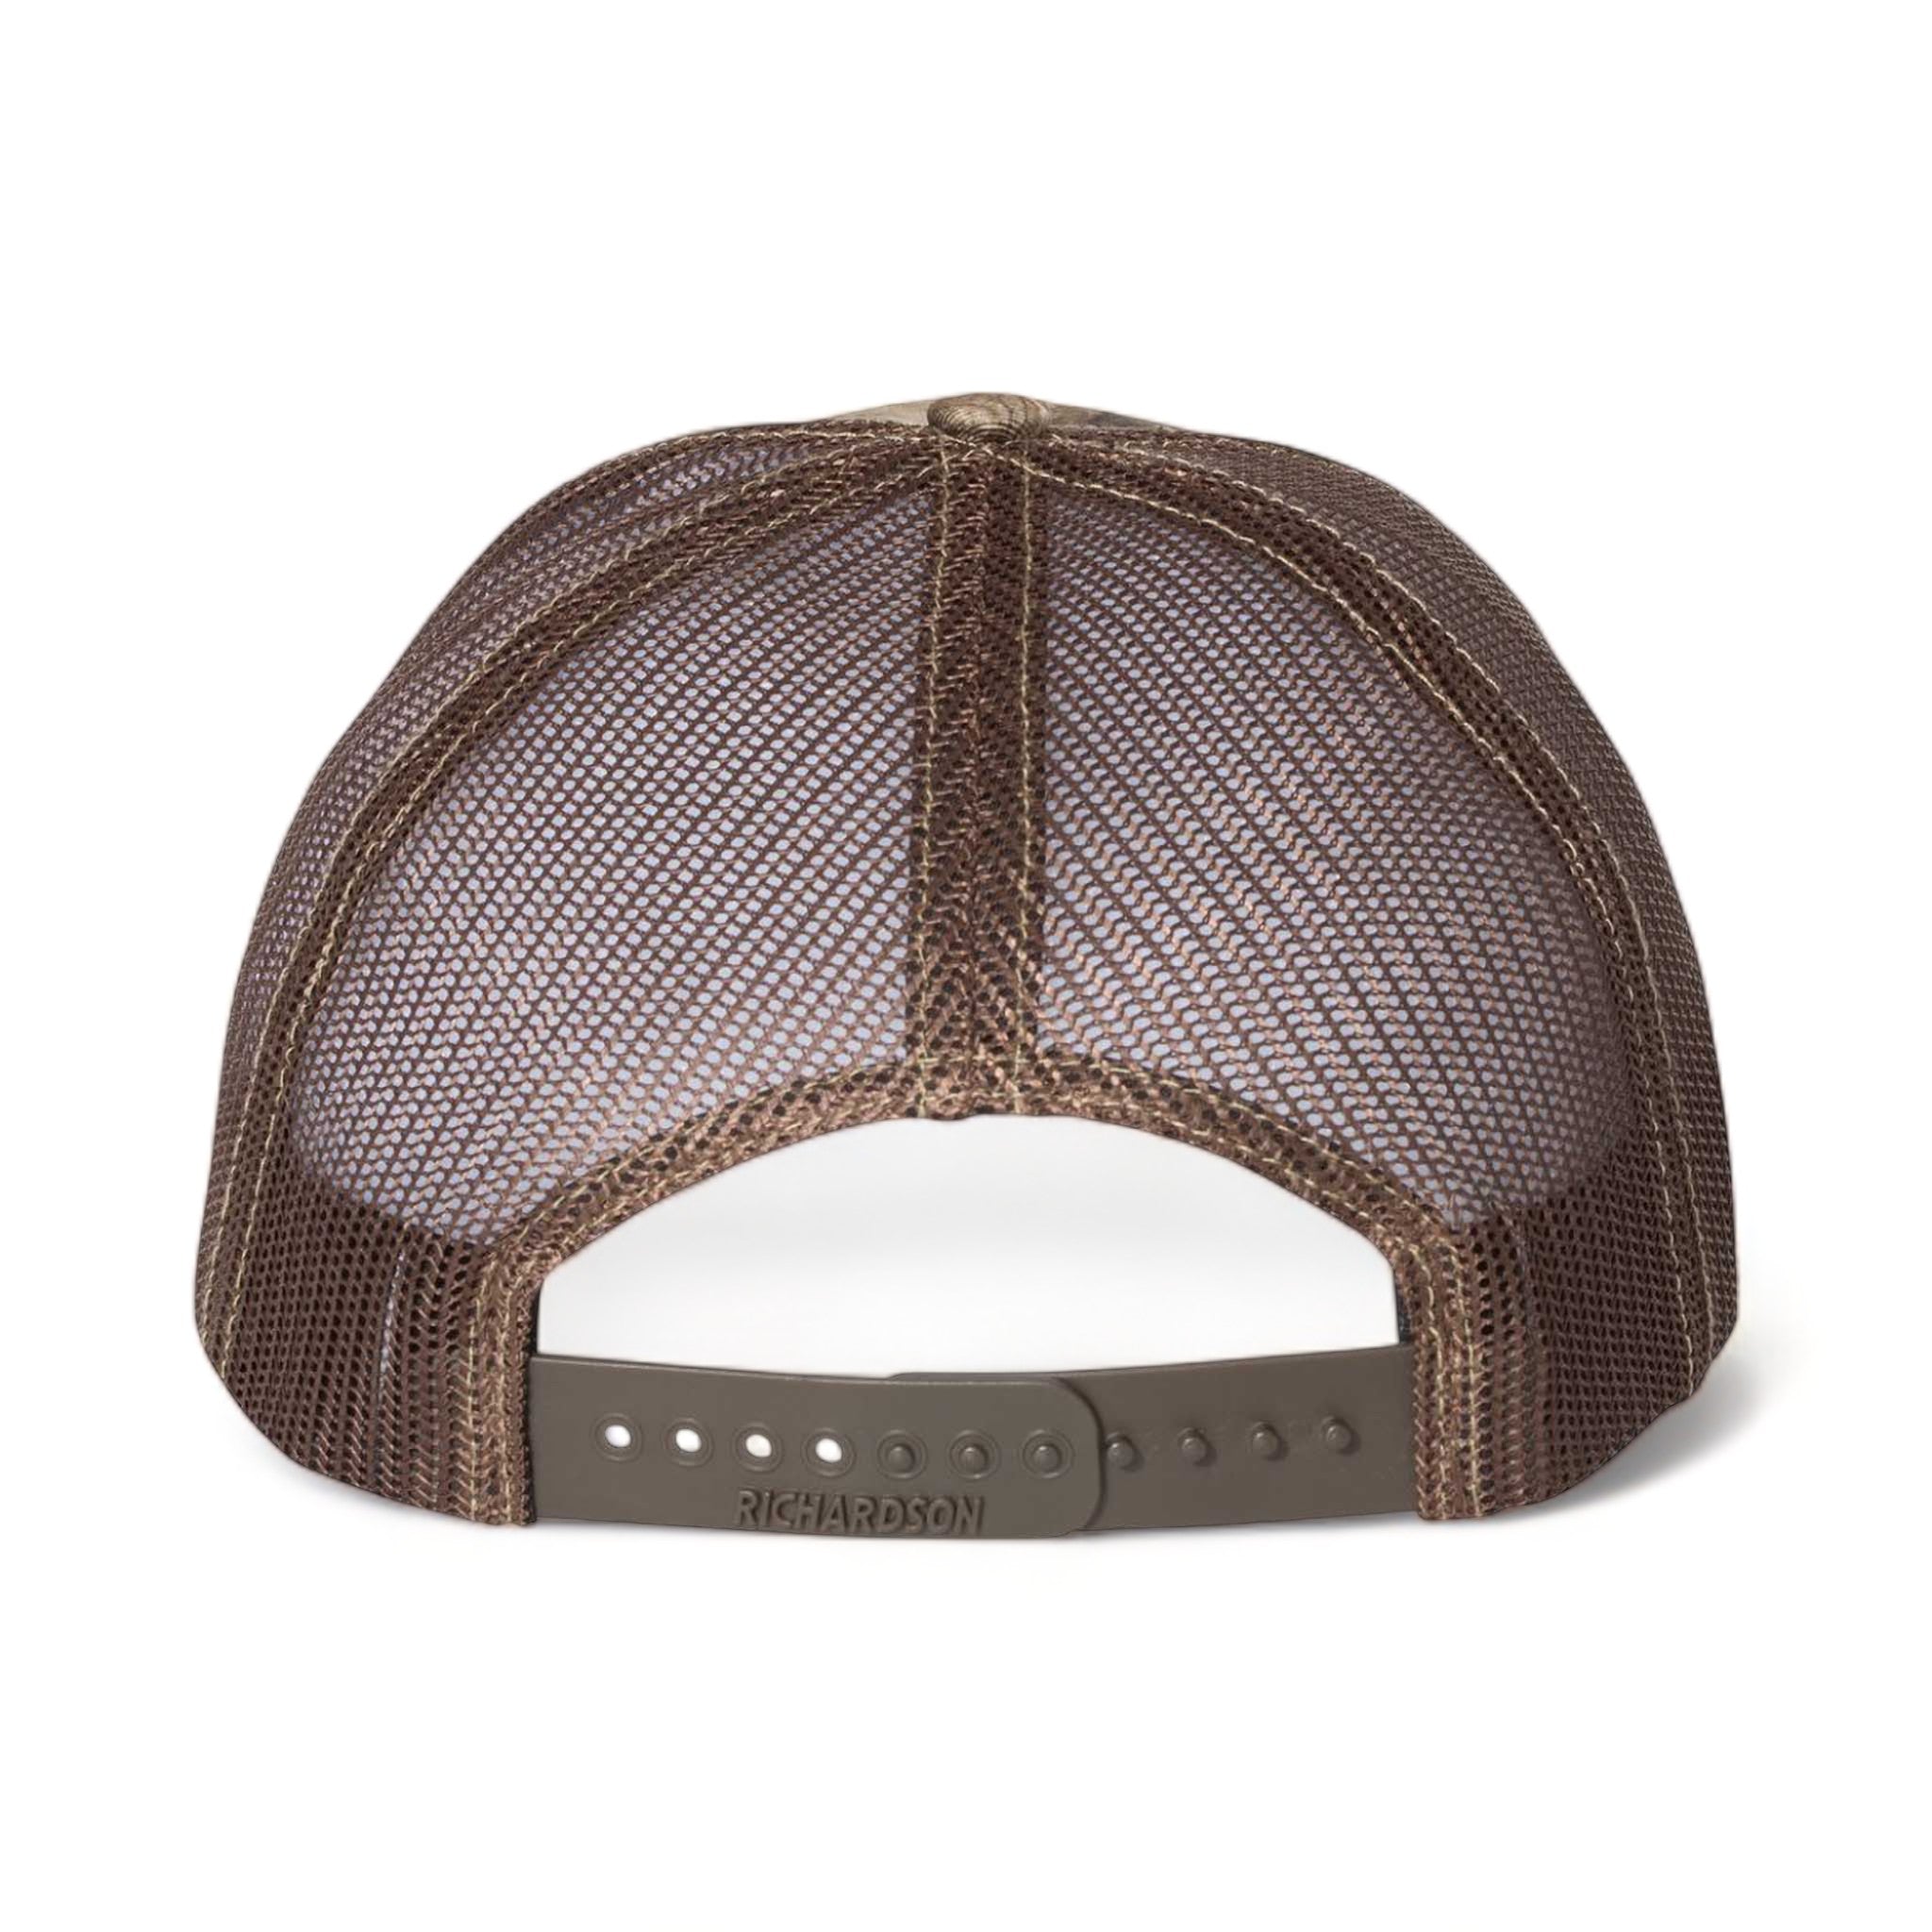 Back view of Richardson 112P custom hat in realtree edge and brown